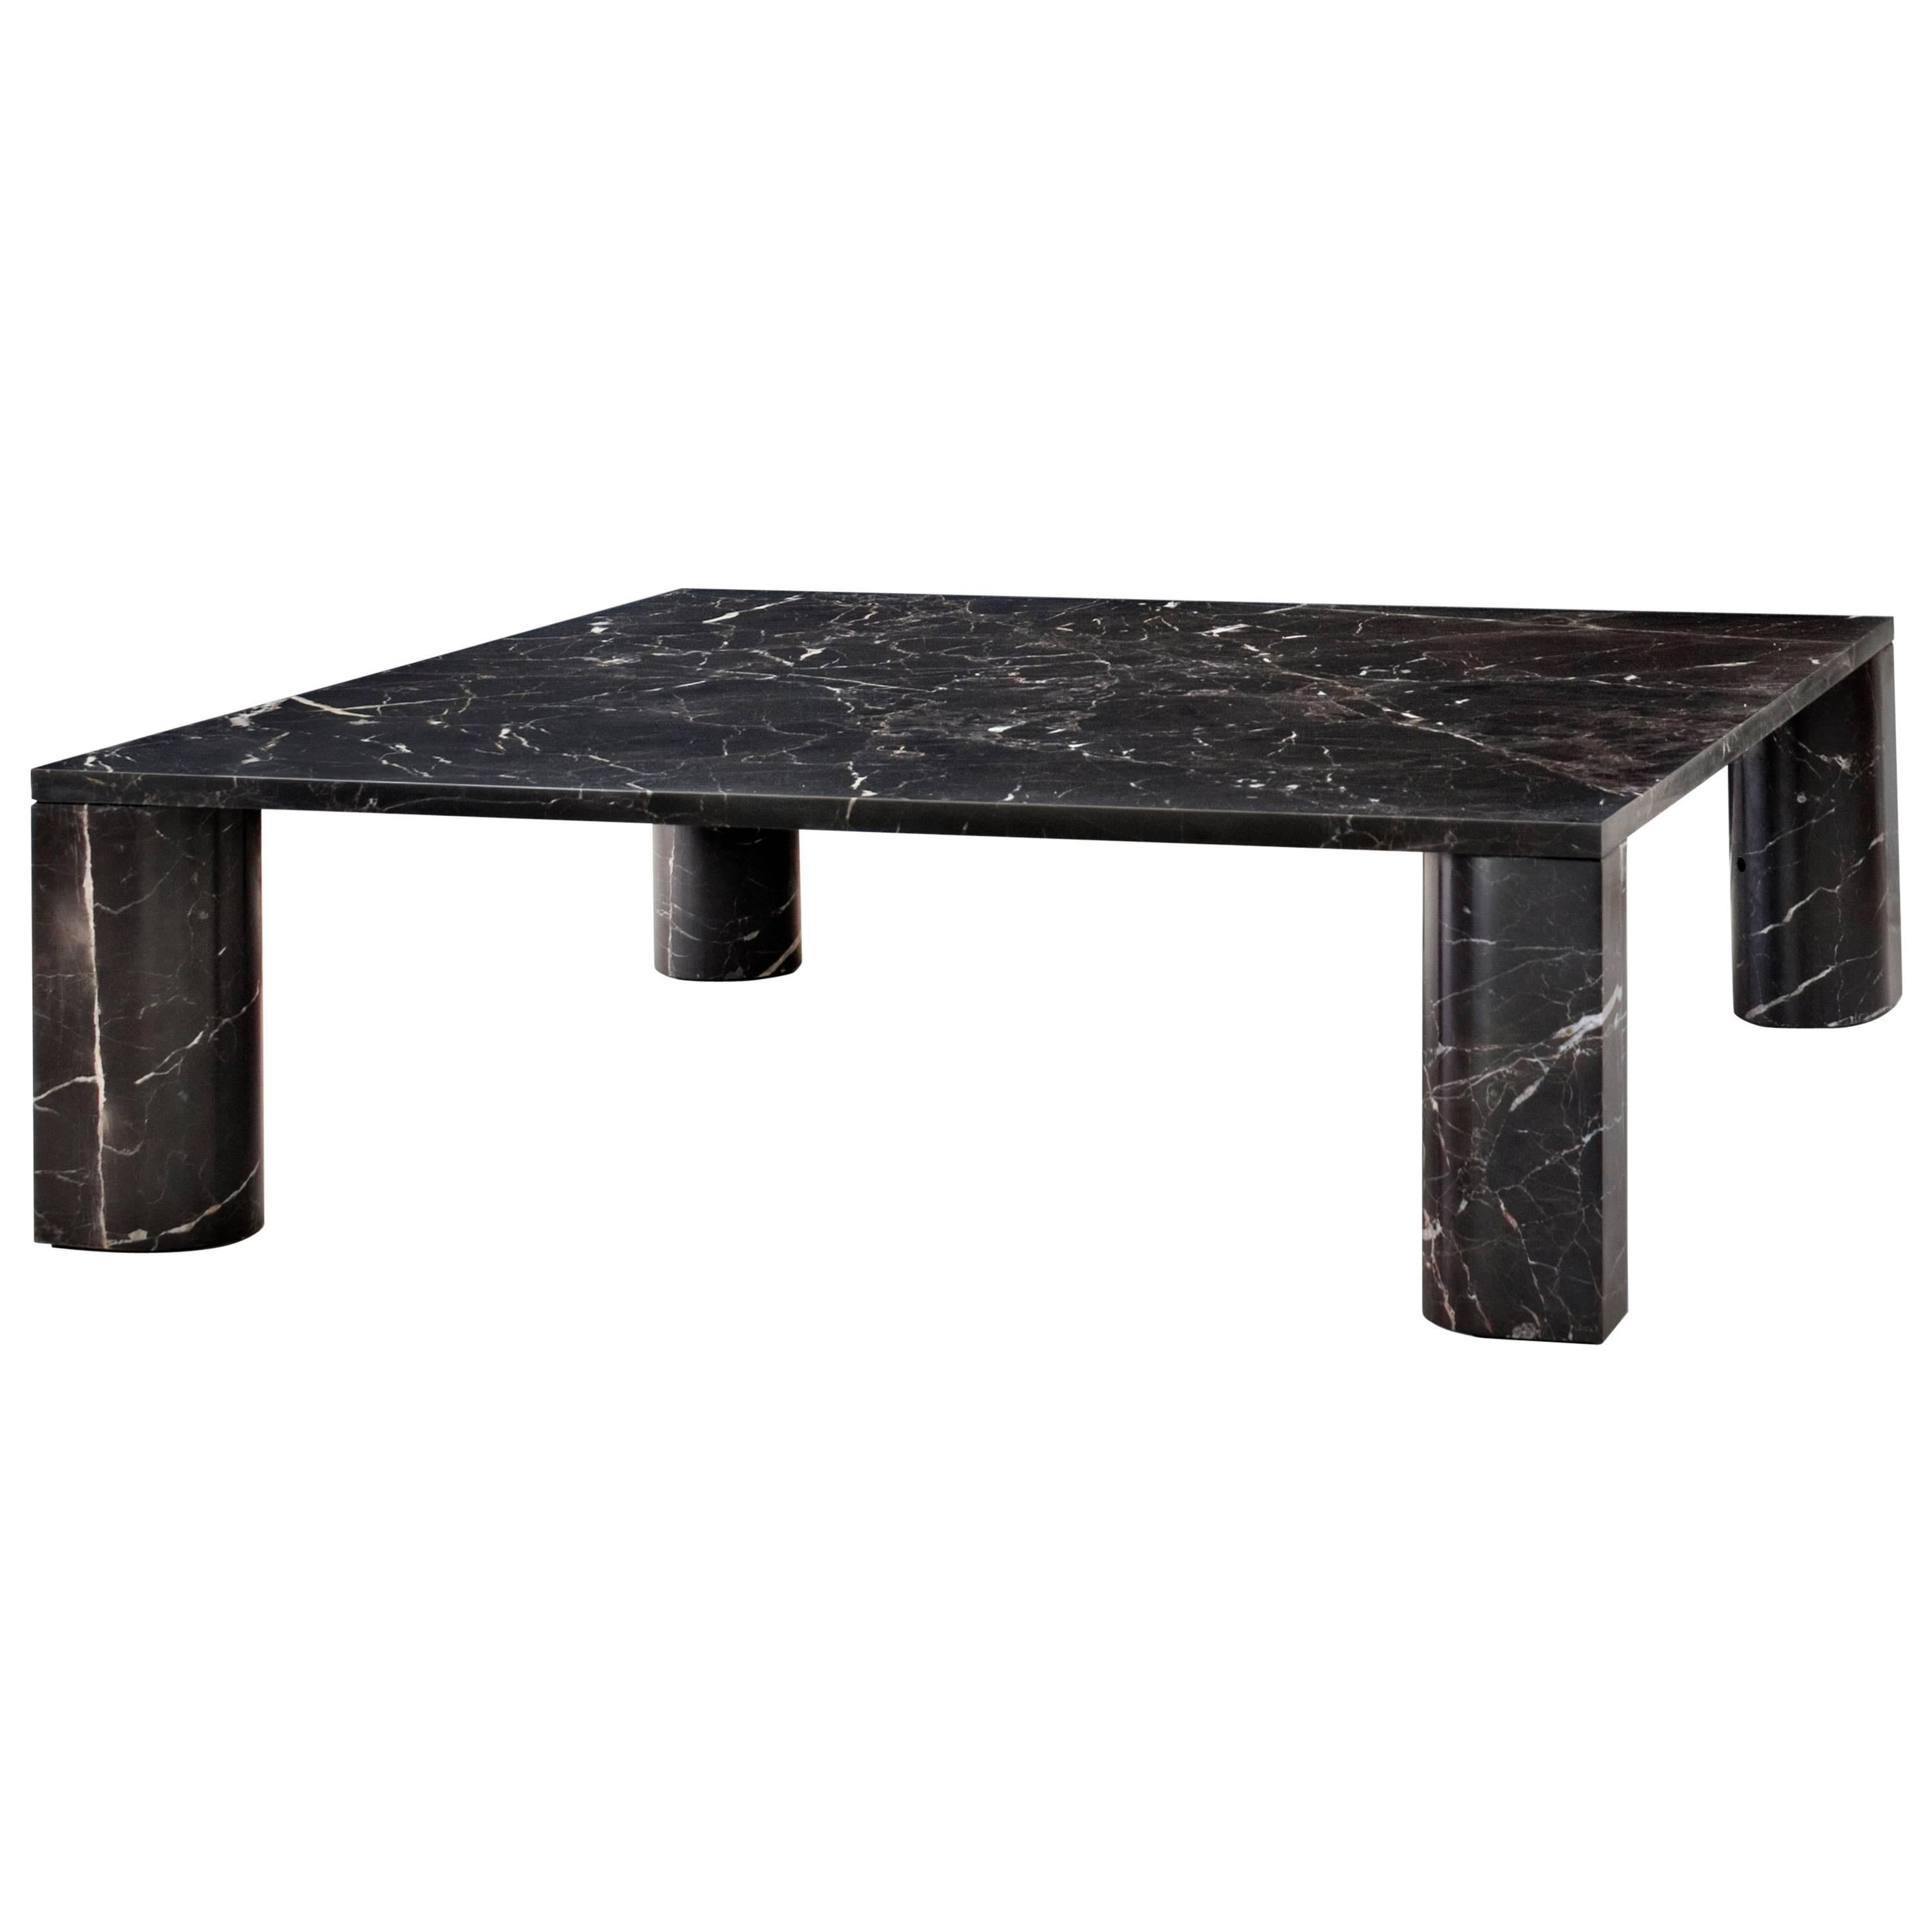 Salvatori 'Love Me, Love Me Not' Square Coffee Table in Nero St. Laurent Marble For Sale